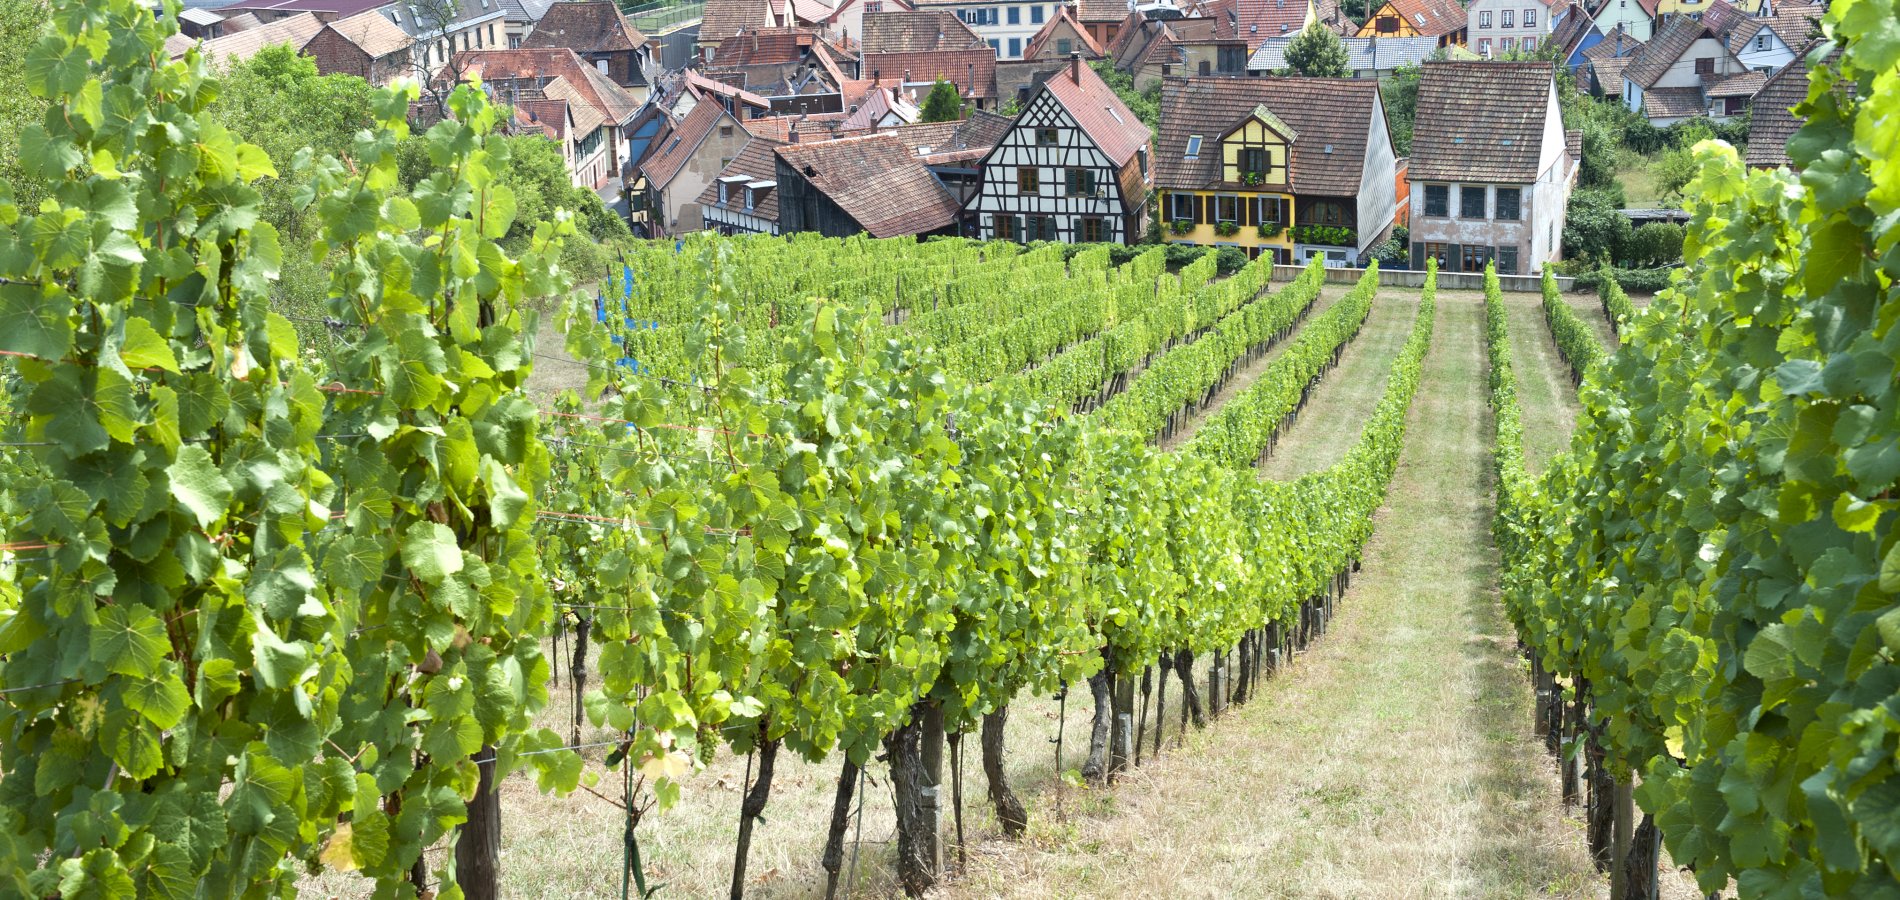 Ophorus Tours - A Private Half Day Trip from Strasbourg to Alsace Villages & Wine Tour